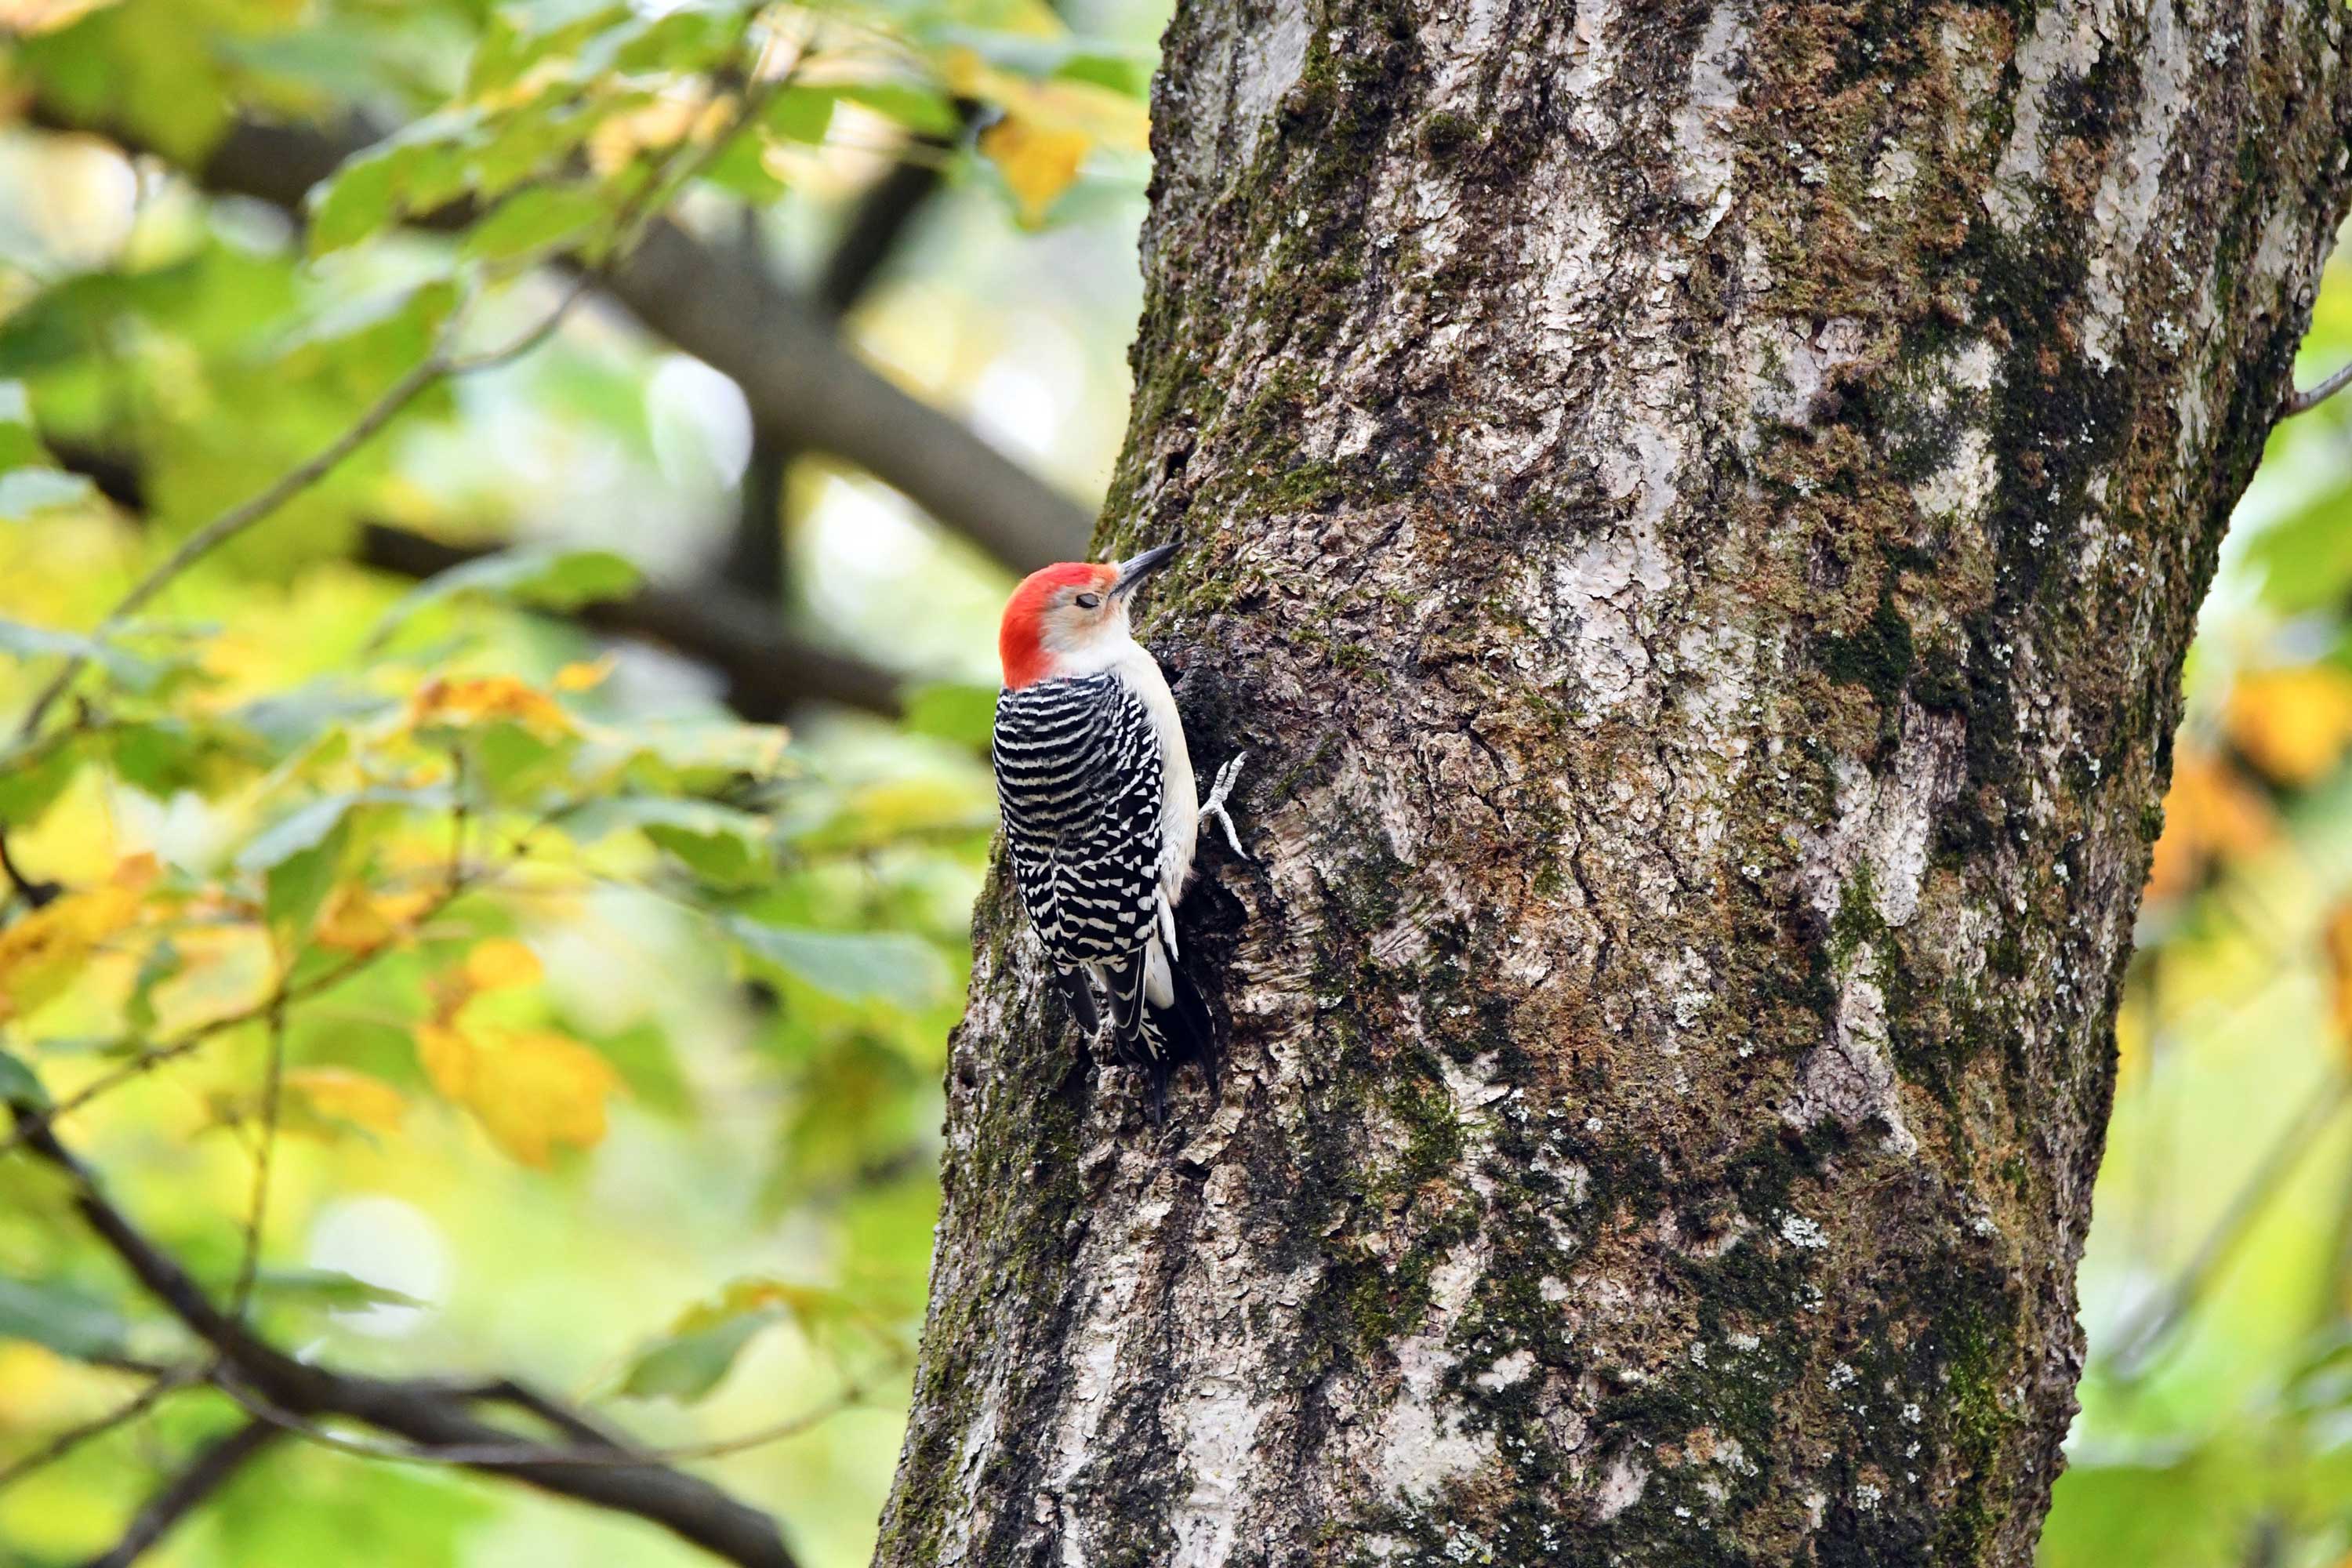 A red-bellied woodpecker climbing up a tree.